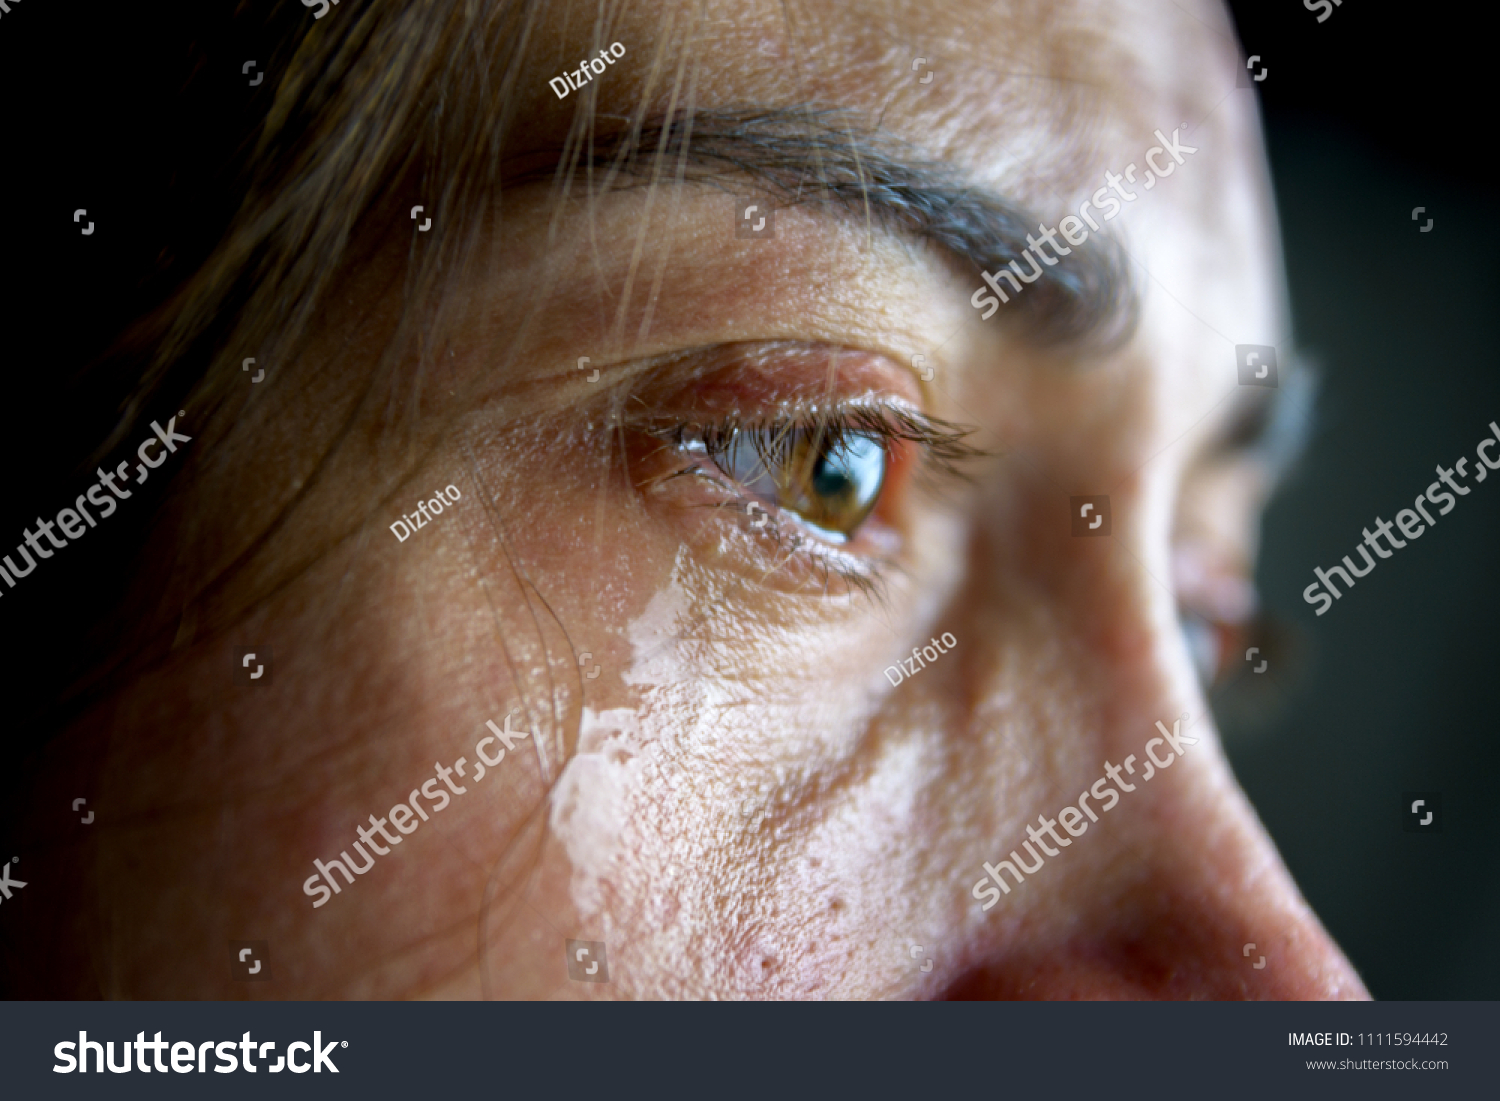 The woman is crying. Close-up eyes and tears. #1111594442